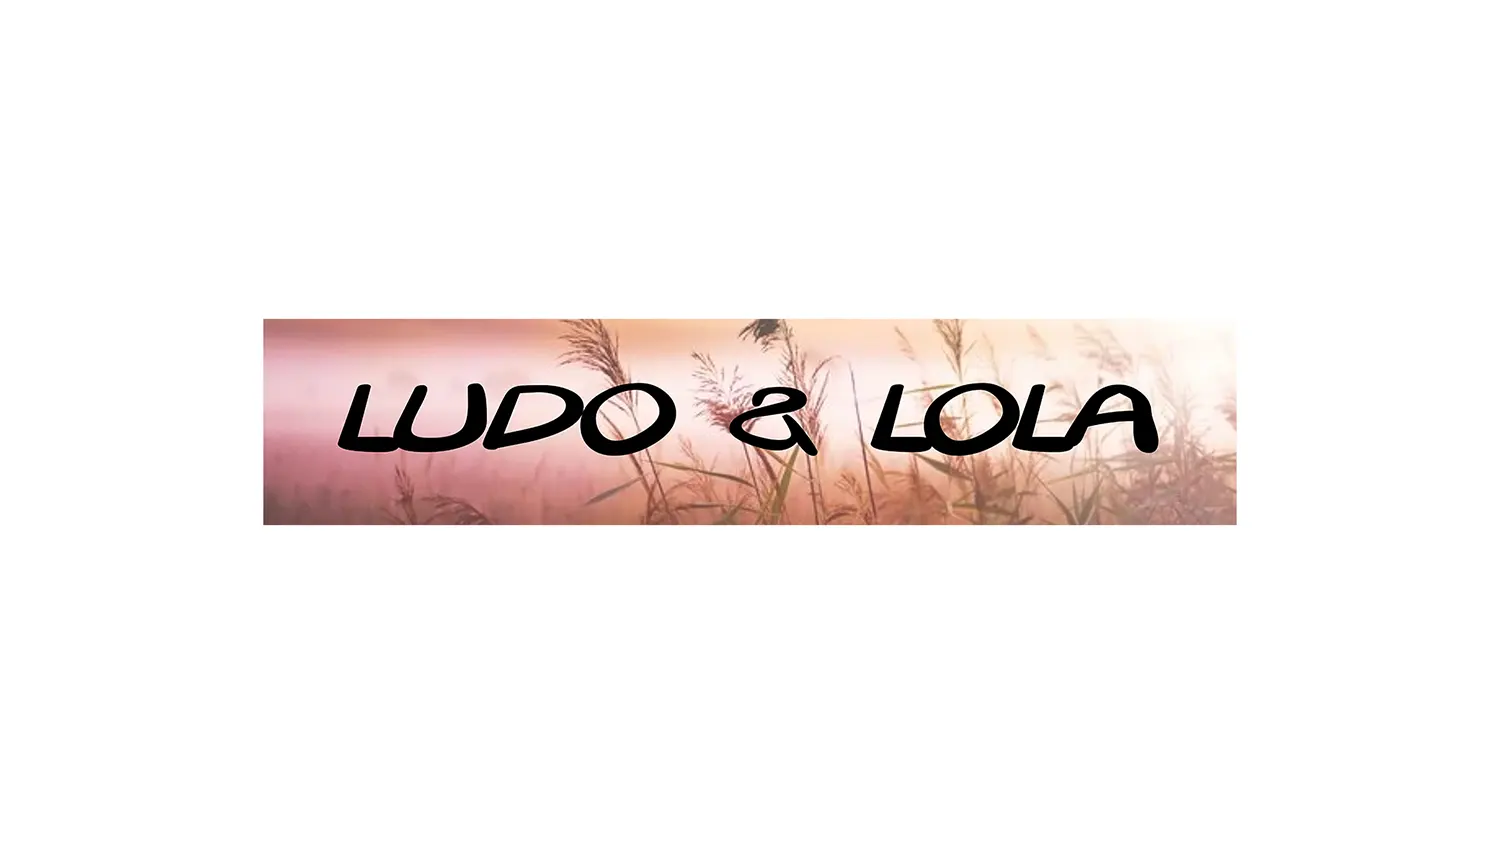 for example, the plaque of Ludo and Lola